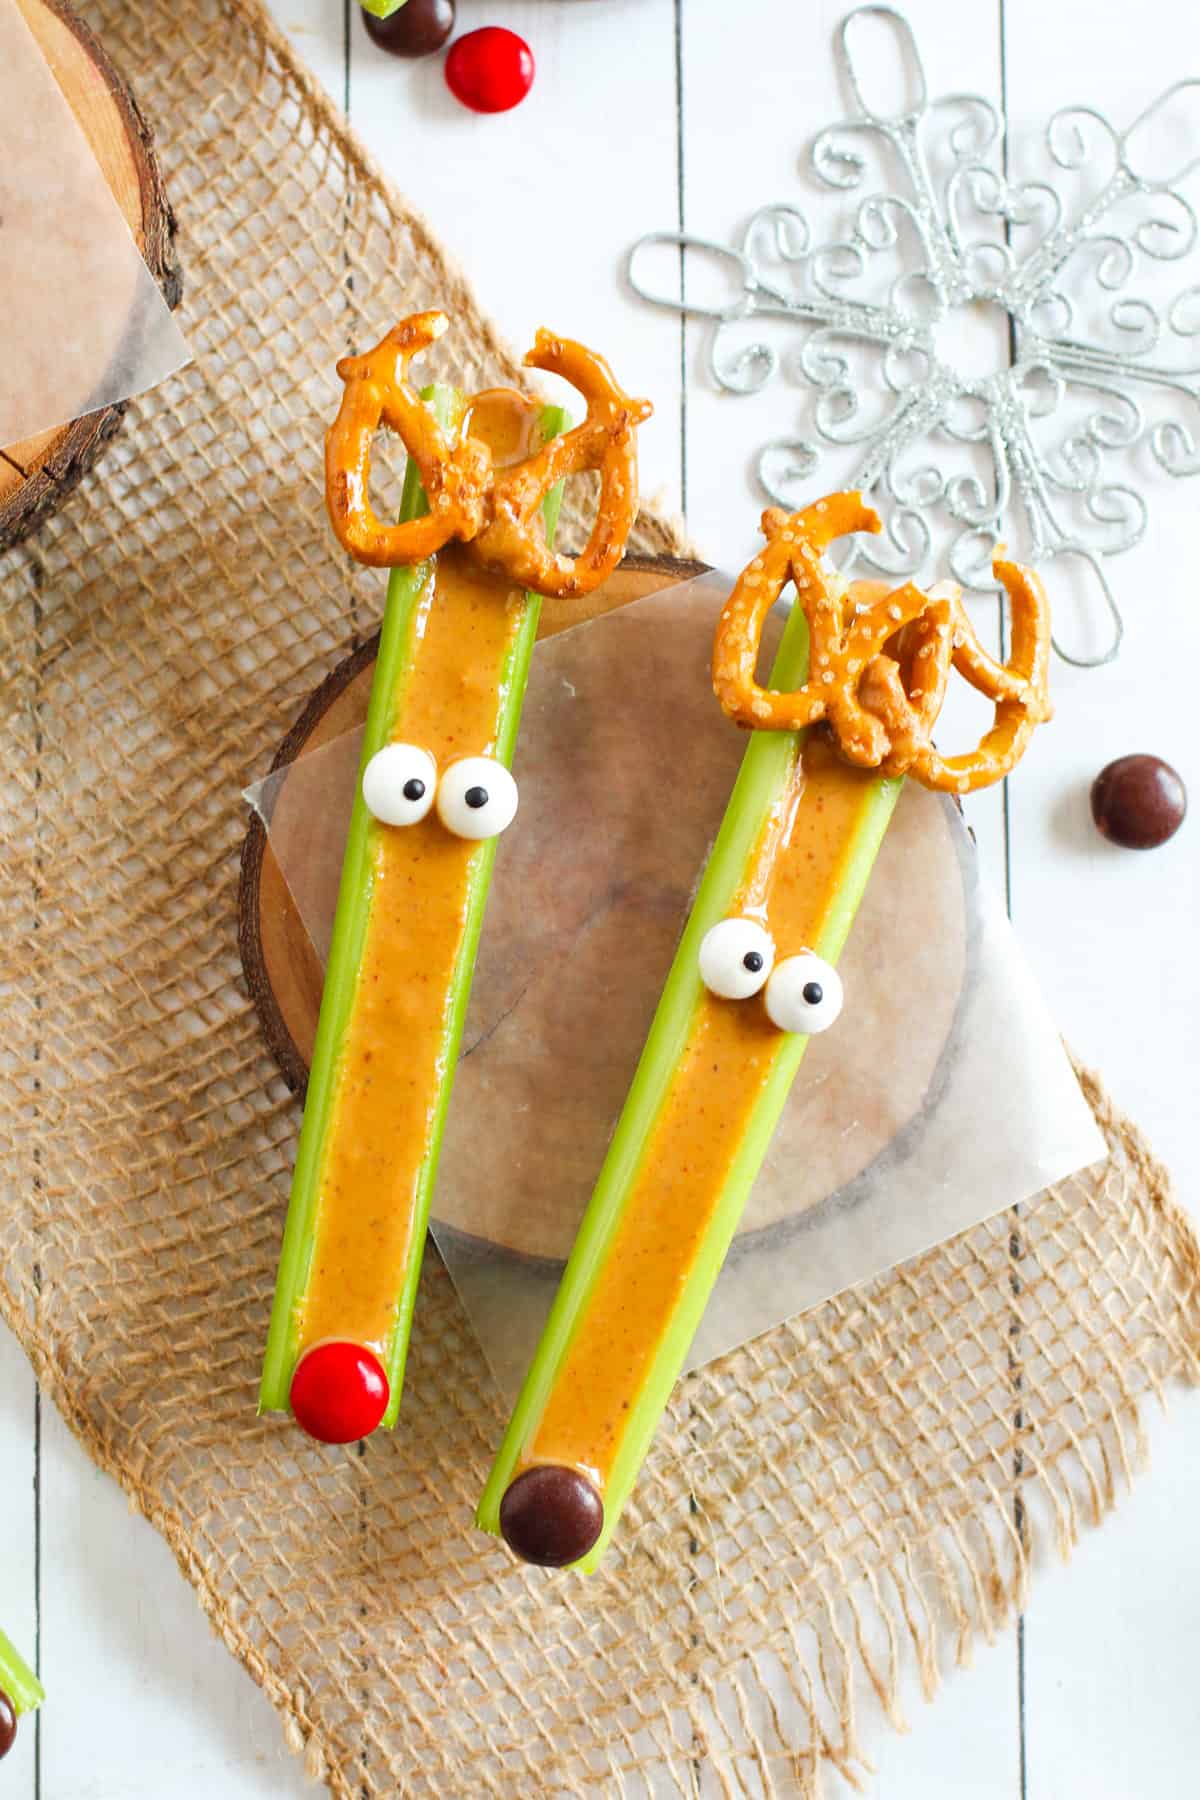 Peanut butter filled celery sticks decorated to look like reindeer with candy eyes, pretzels, and M&Ms.